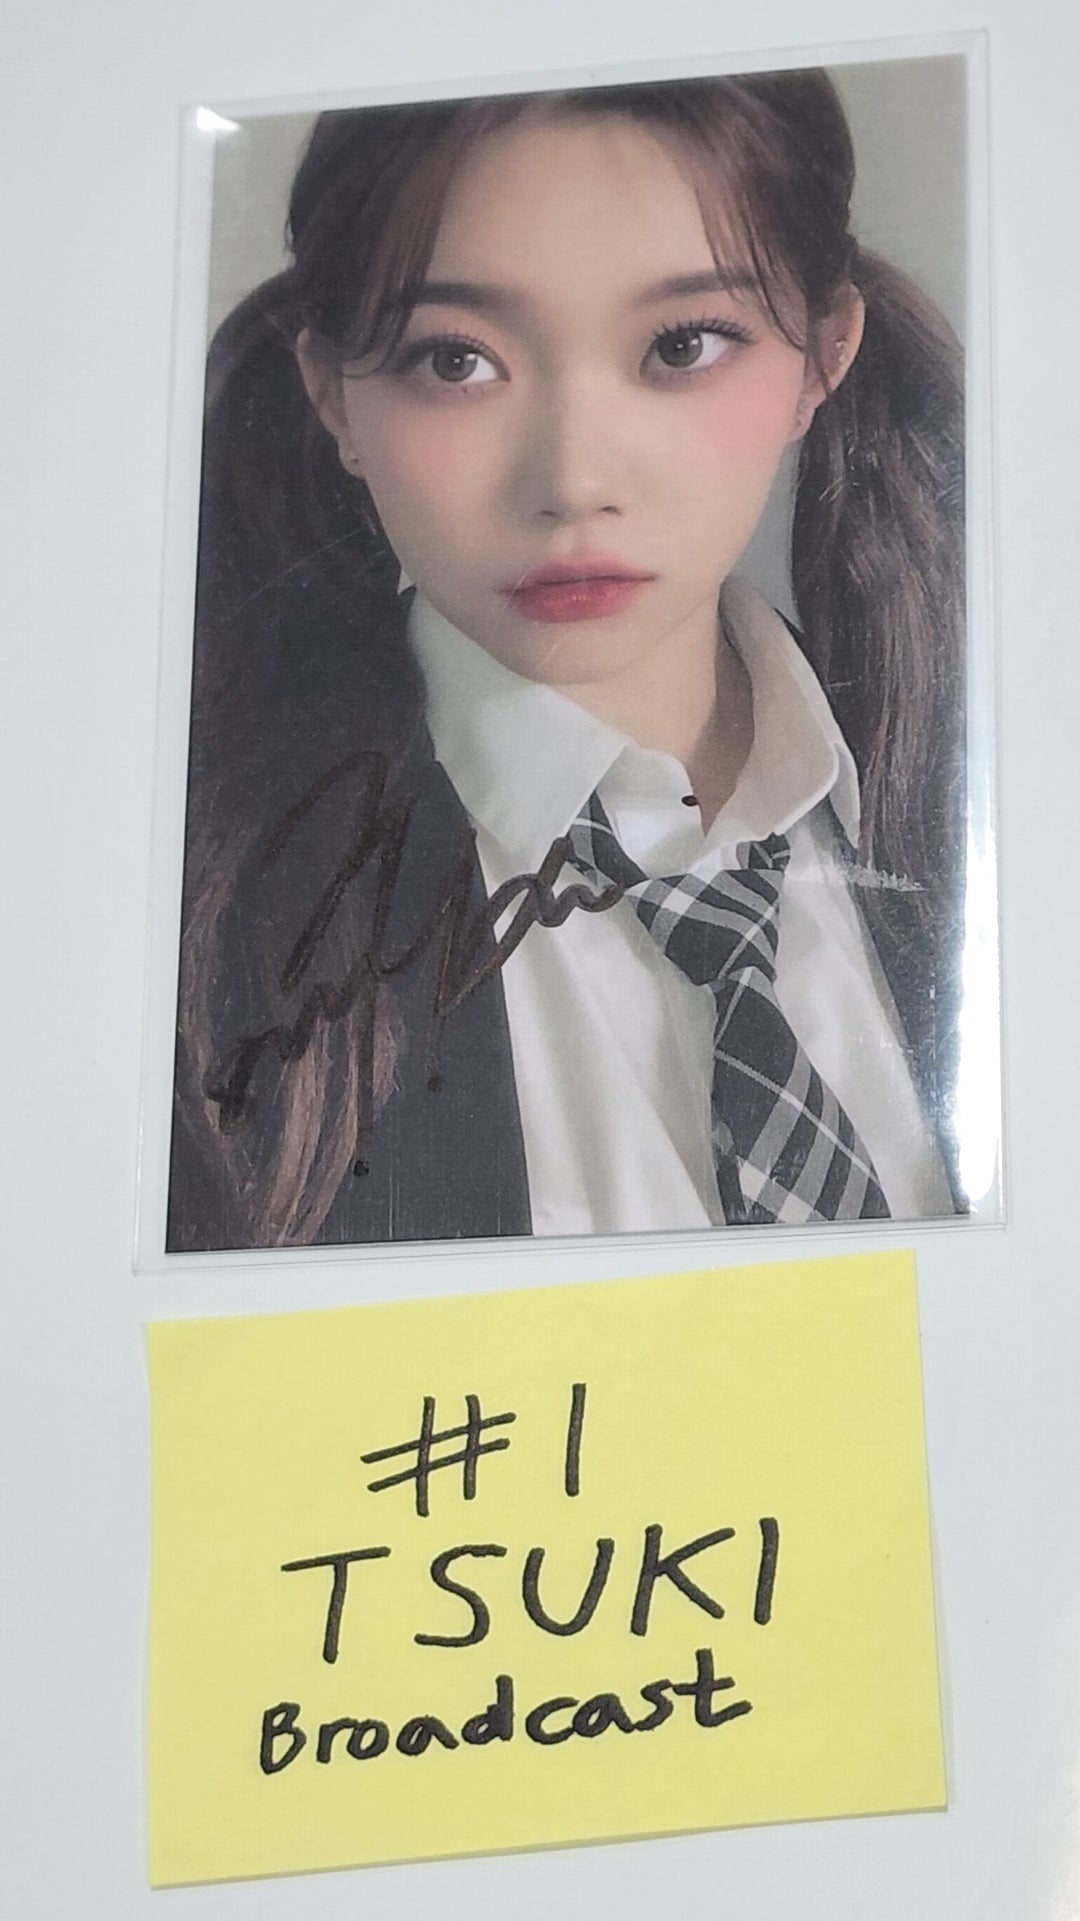 TSUKI (Of Billlie) ‘RING ma Bell’ - Broadcast Hand Autographed(signed) Photocard